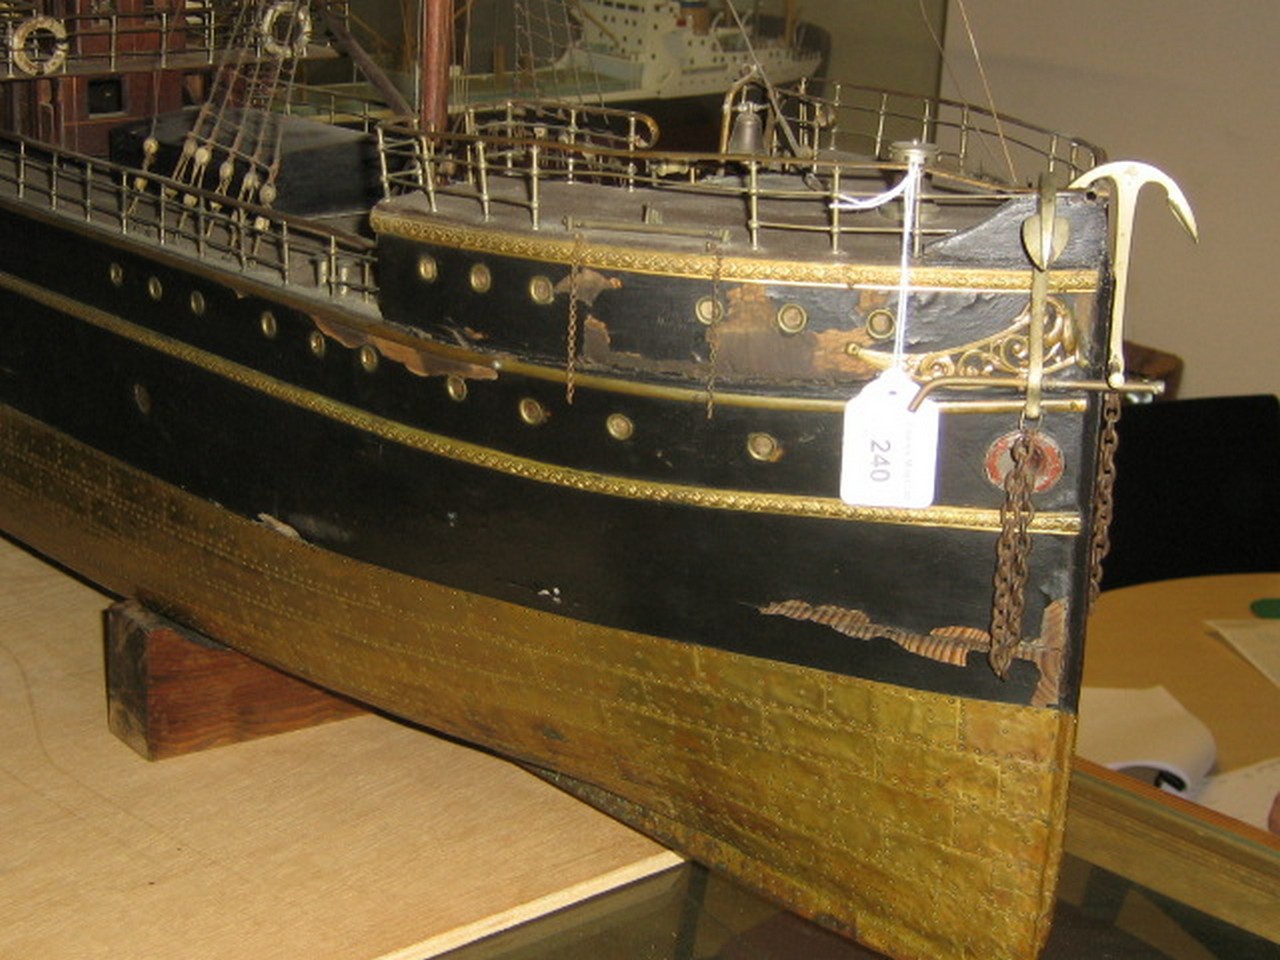 A LARGE LIVE-STEAM MODEL FOR A PASSENGER CARGO SHIP, CIRCA 1890, the hull carved and hollowed from - Image 5 of 12